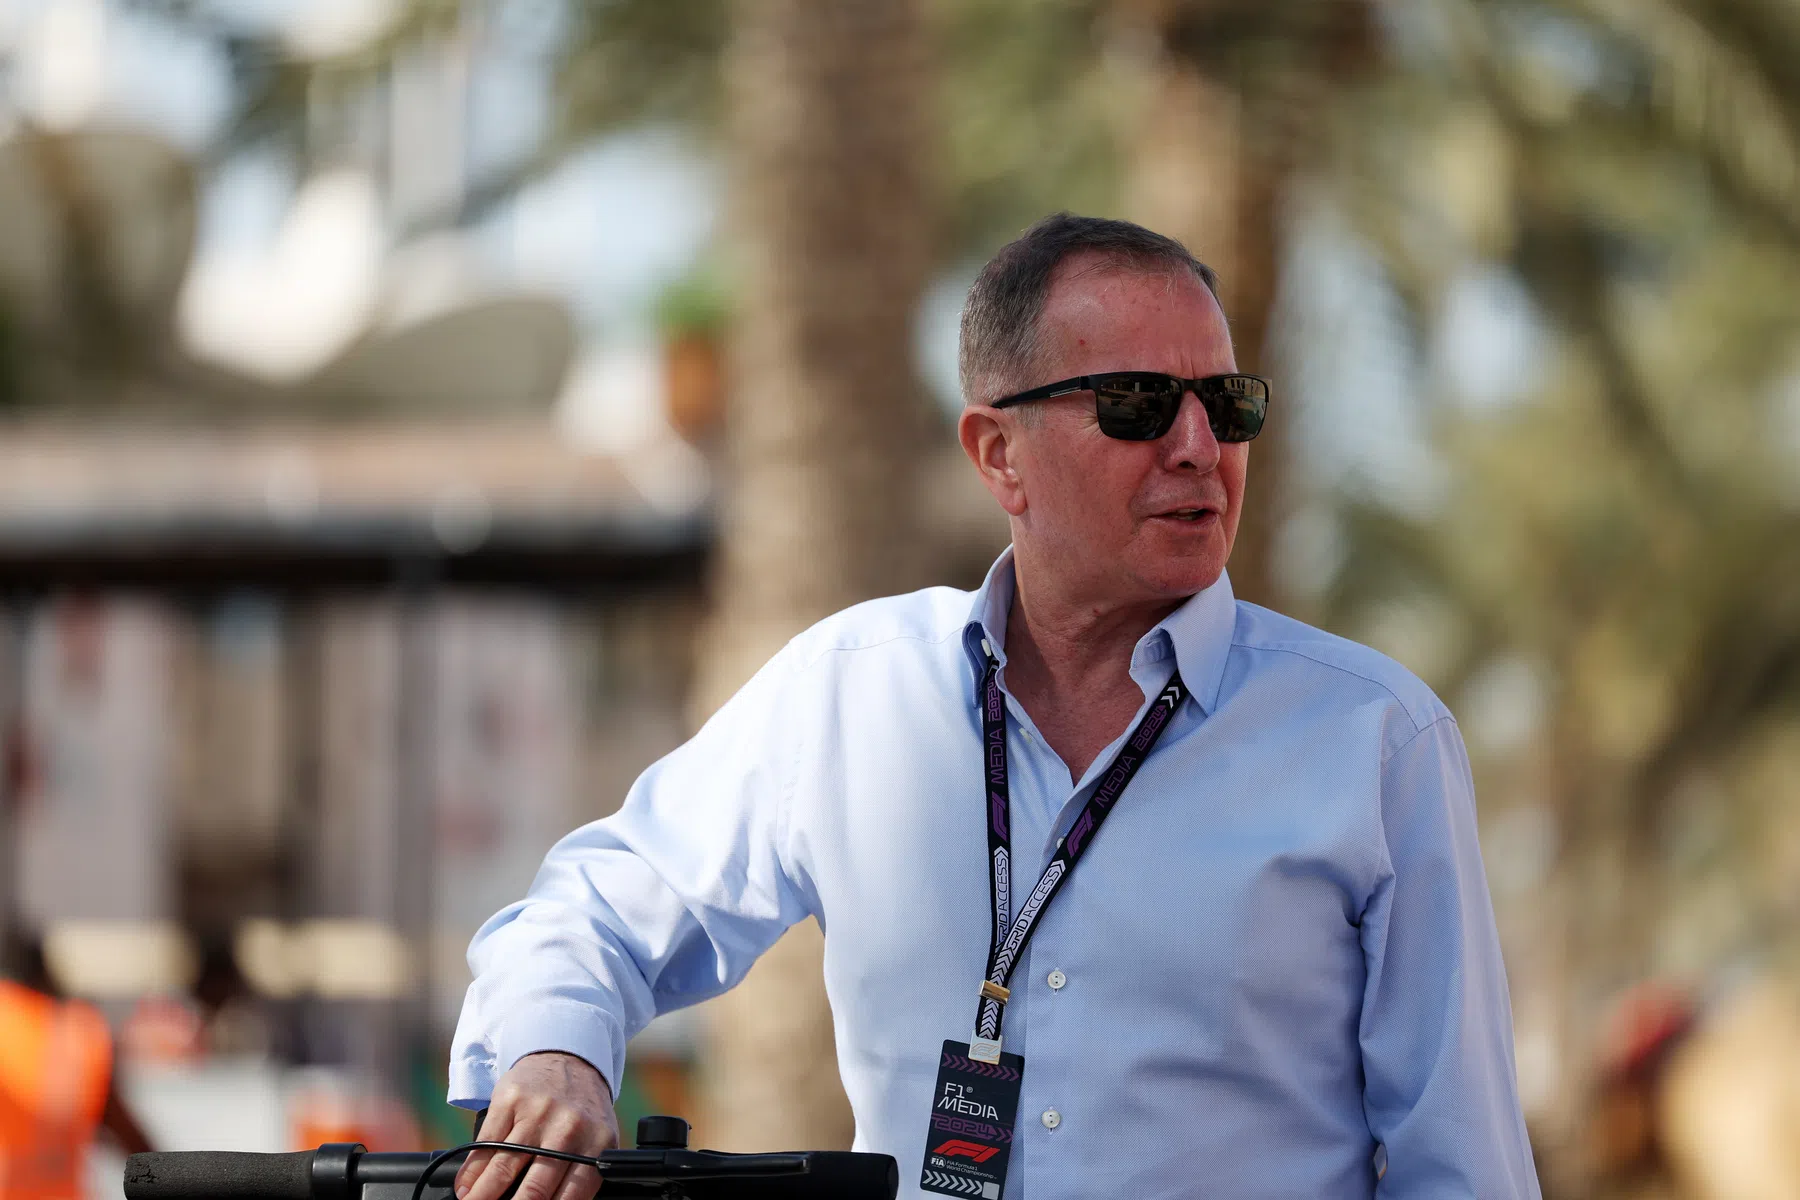 Brundle unsure which Jonas Brother he interviews on grid walk